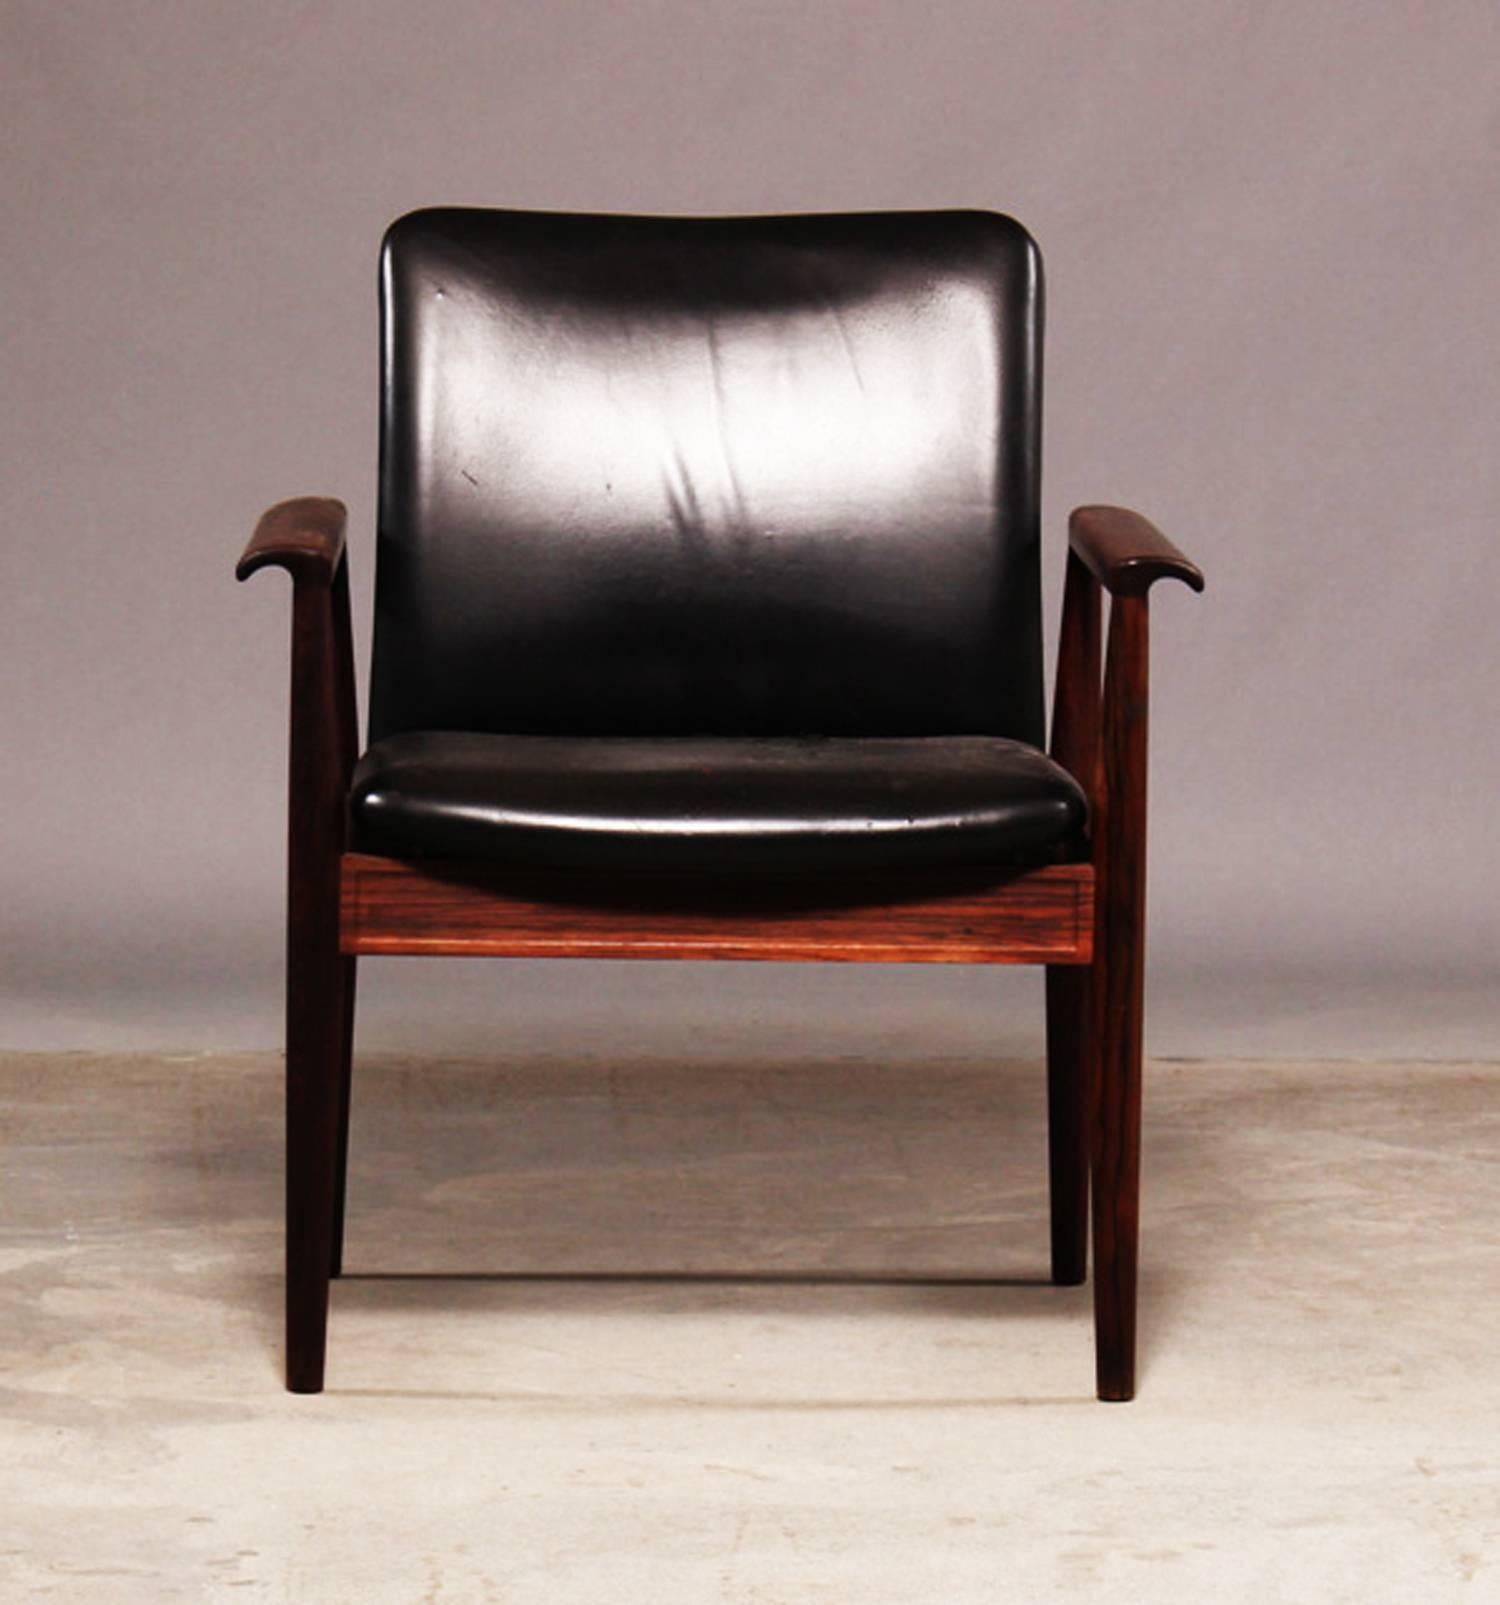 Finn Juhl, diplomat desk chair or armchair with frame in solid rosewood (rio-palisander), new seat upholstery and cover, model 209. Designed in 1963. Produced by France & Son.
Measures: H. 82 cm, SH. 44 cm, B. 69 cm.
Used but still in perfect